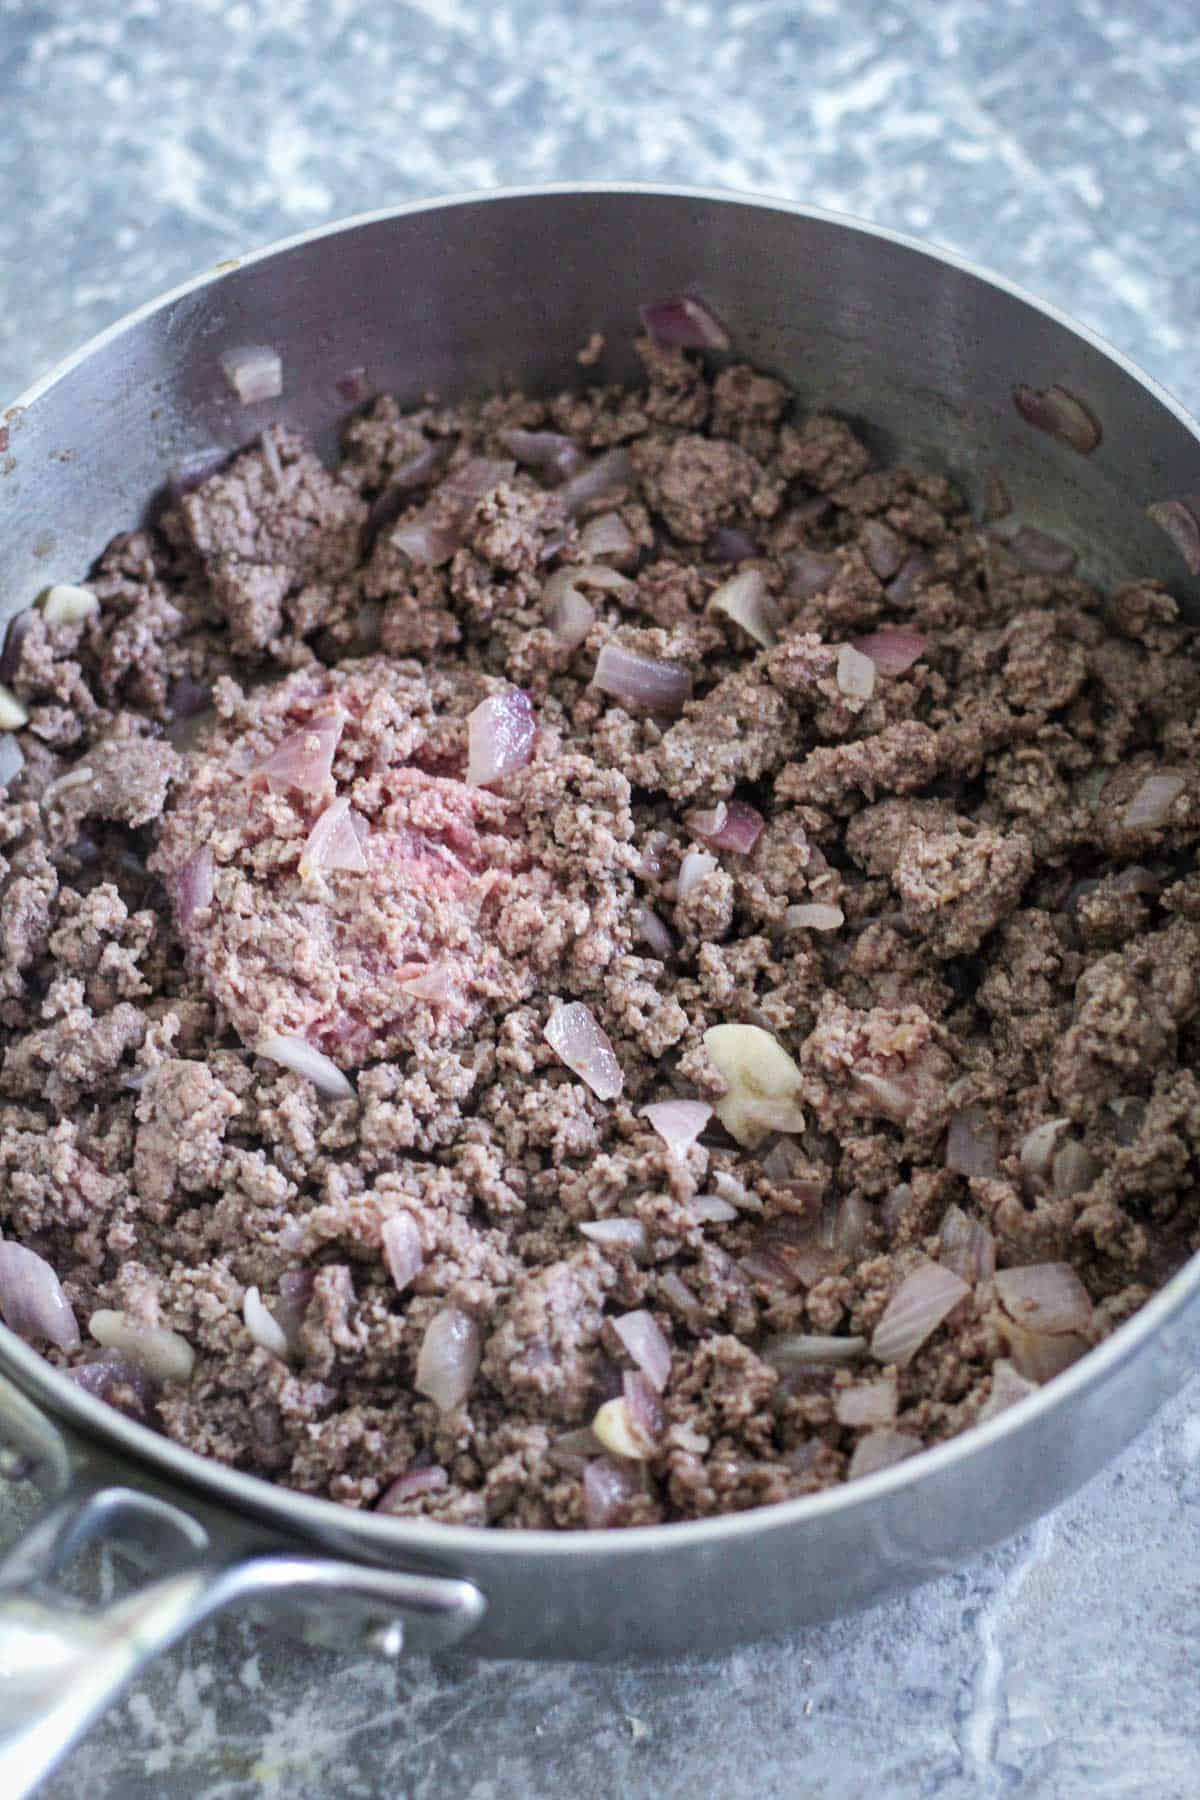 Browning ground beef.